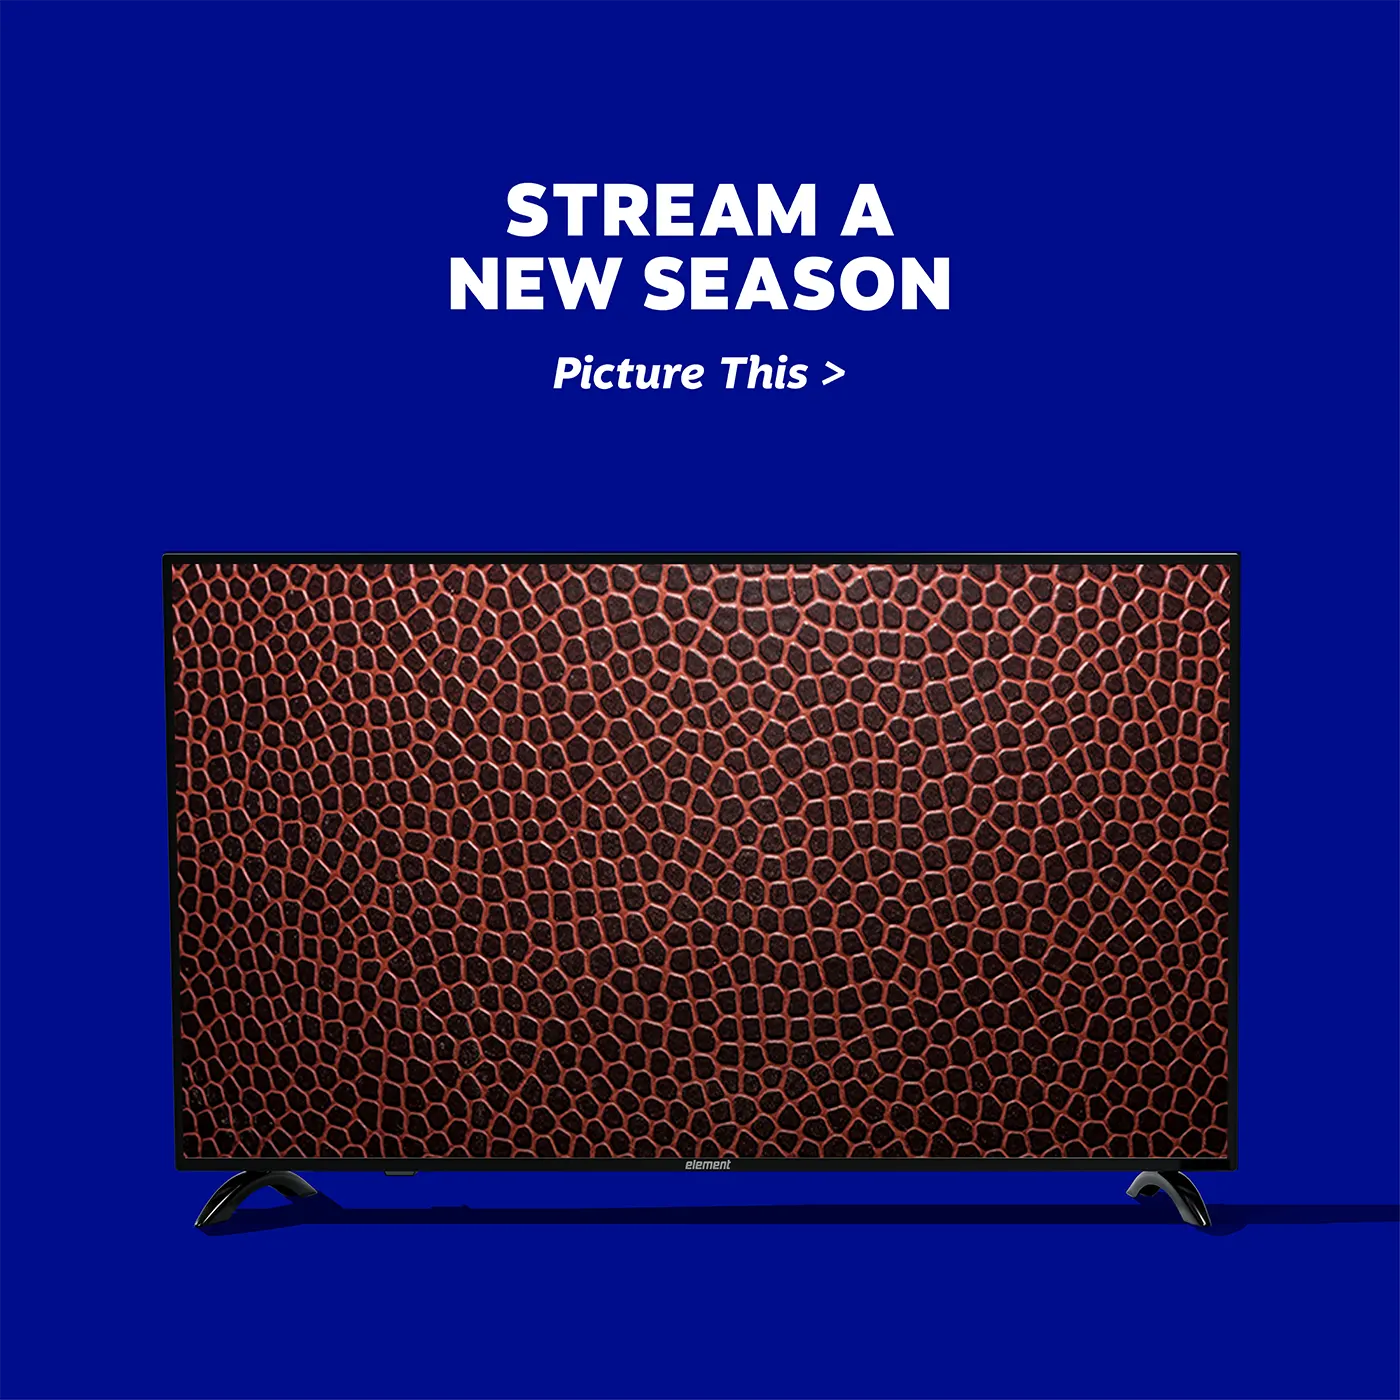 TV with the texture of a football on it